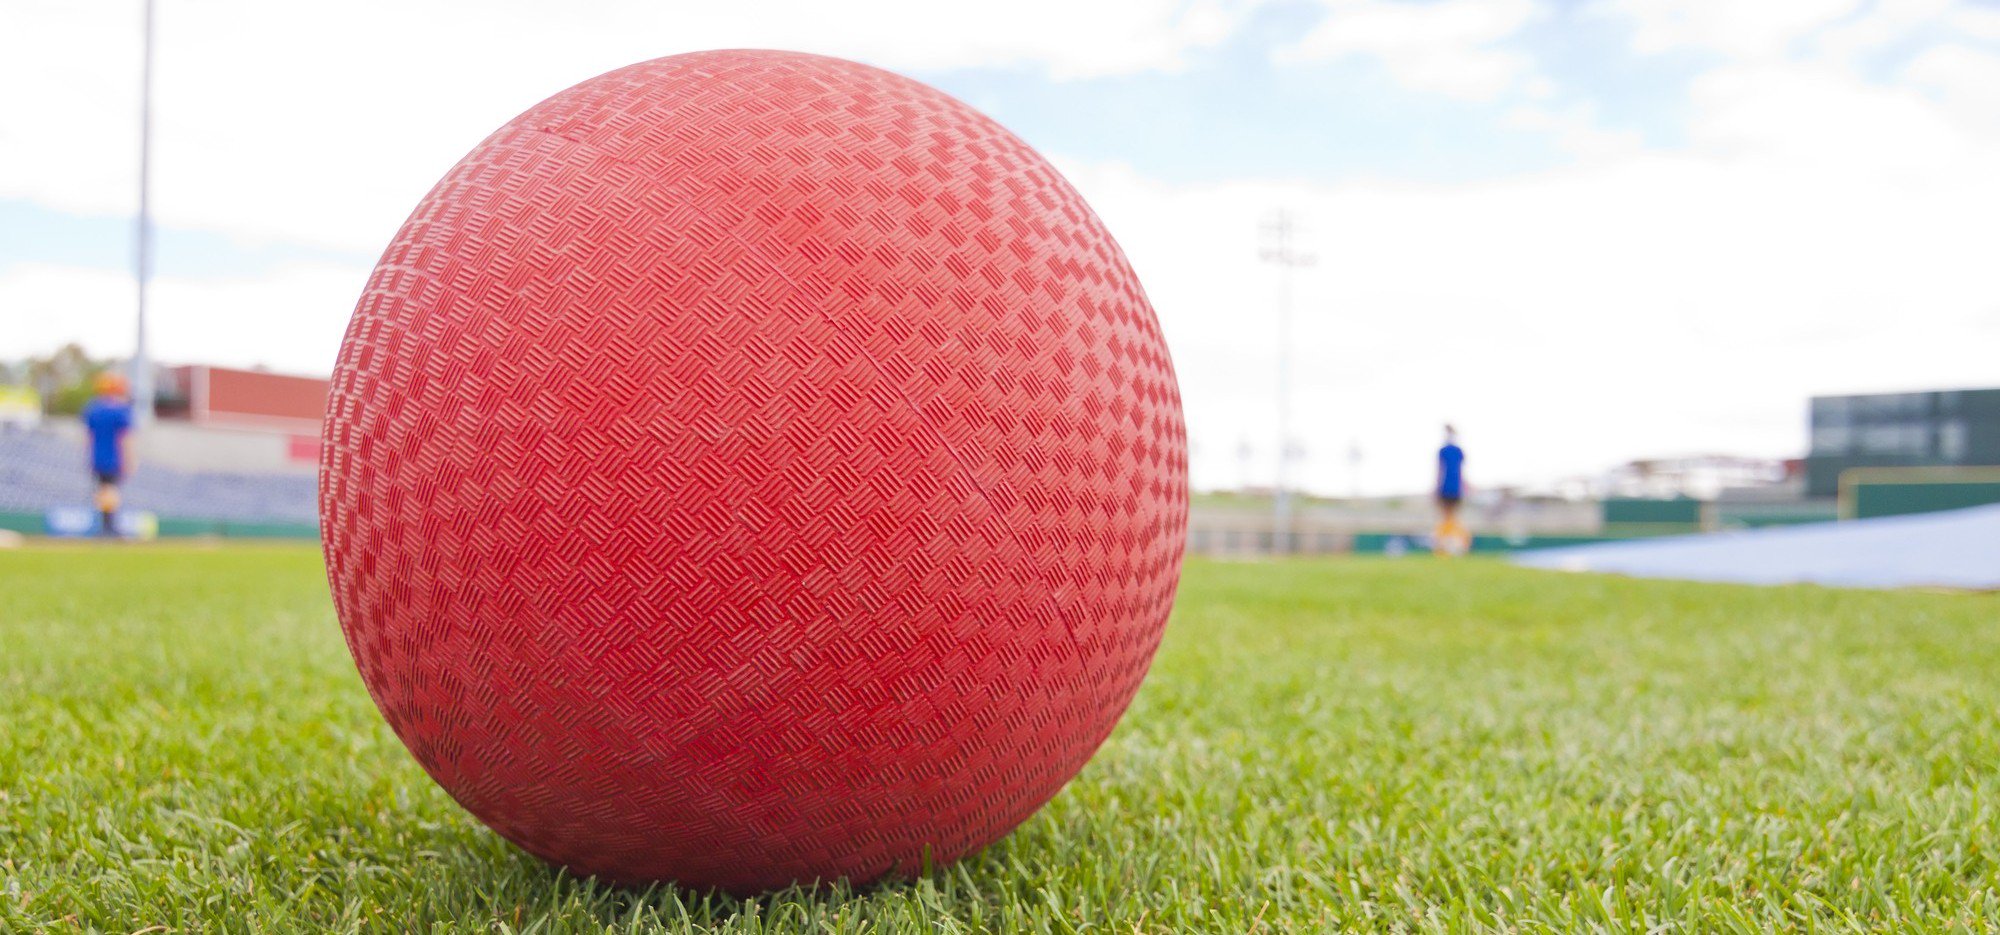 Close up of a red kickball on a grass field